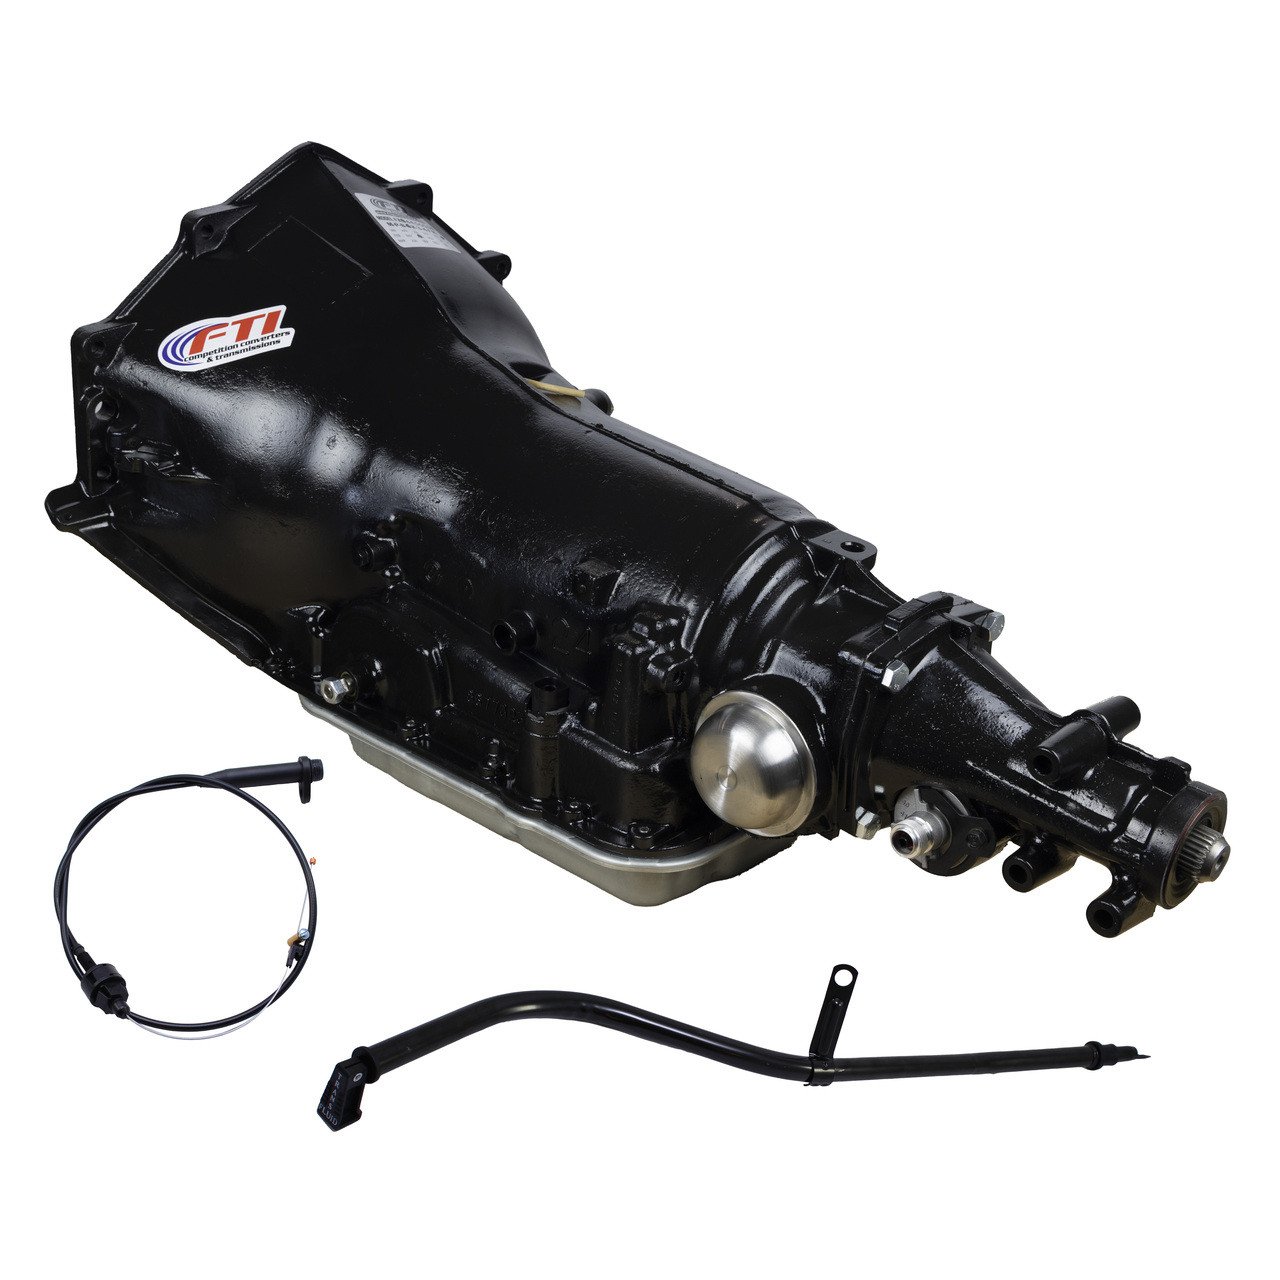 FT7R4-2H 700R4 Level 2 Automatic Transmission For Engines With Holley Carburetor [450 HP]